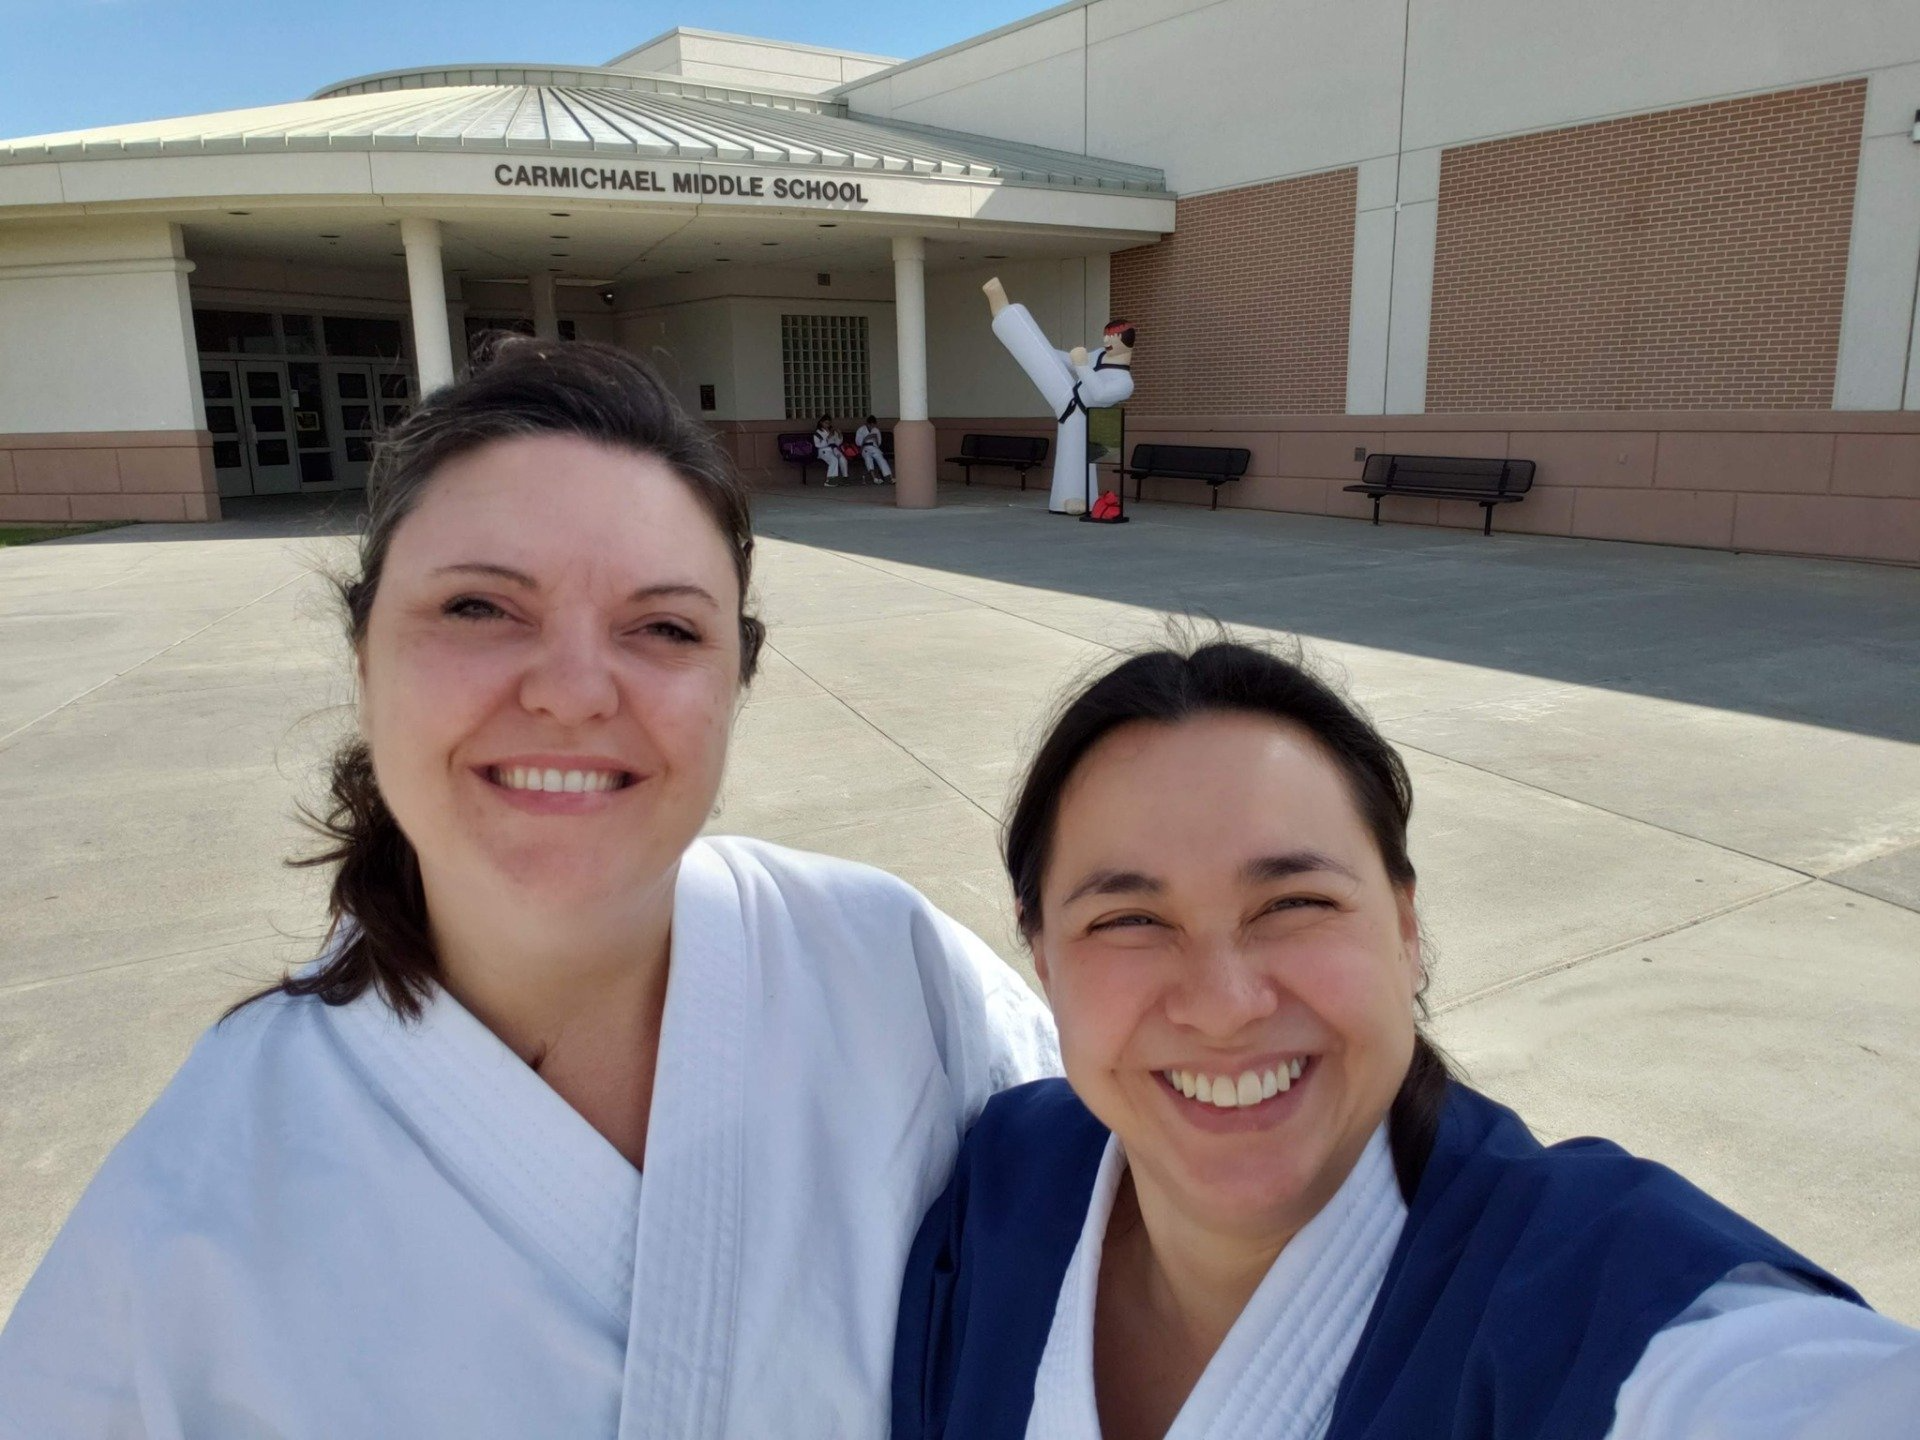 karate with a friend